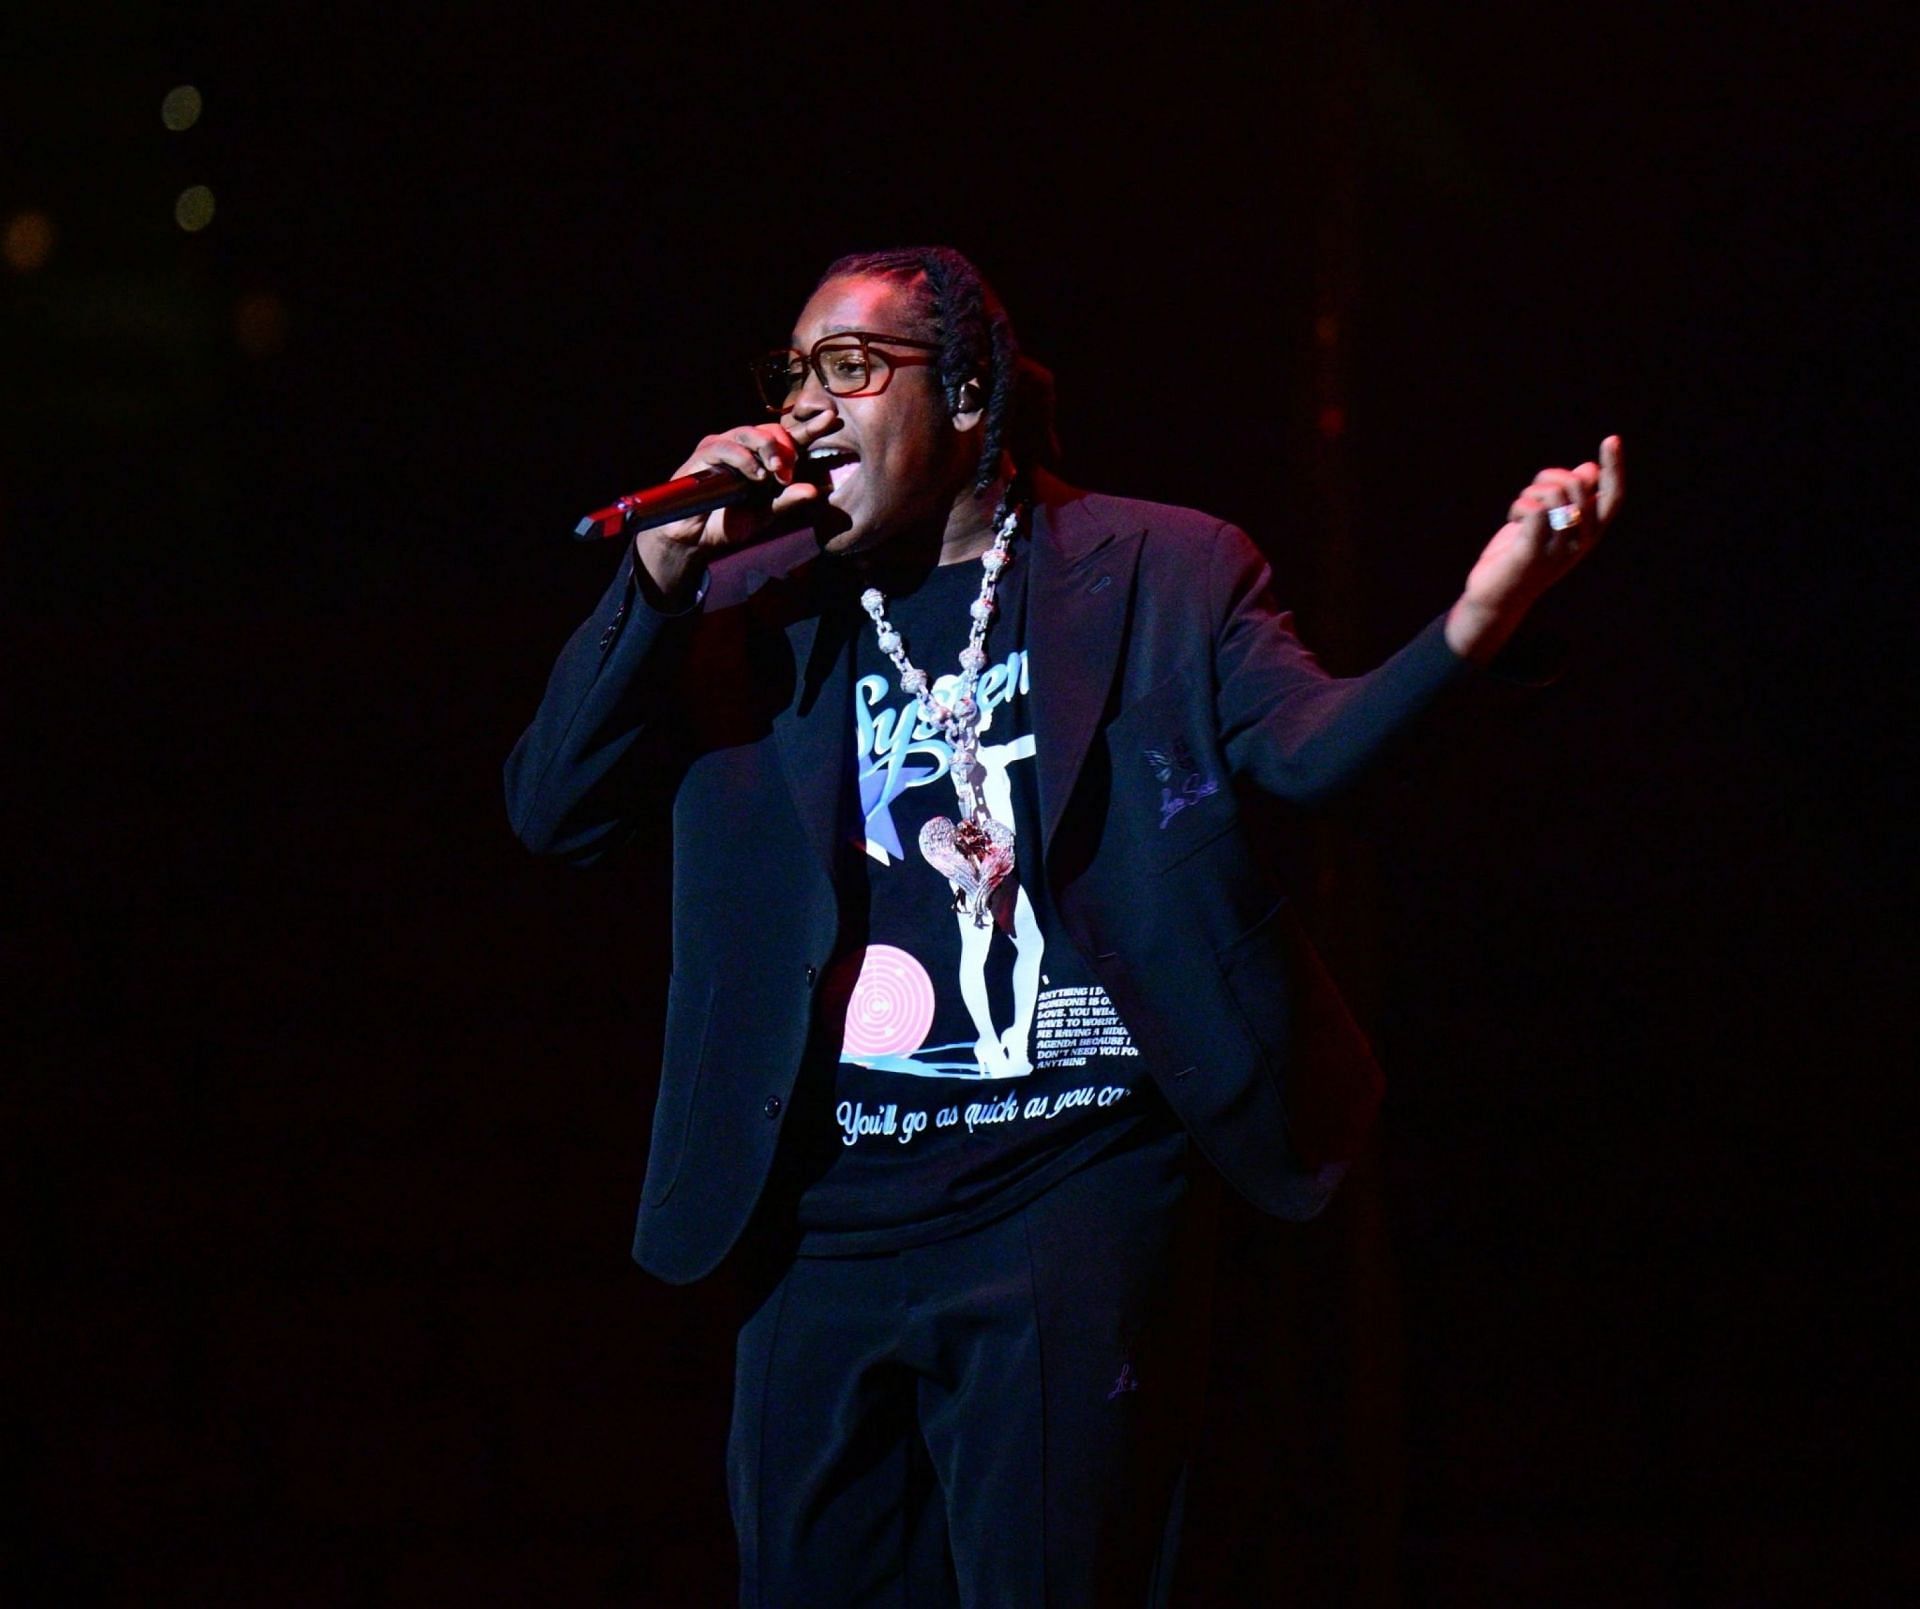 Don Toliver during On Big Party Tour at FLA Live Arena on March 17, 2023 in Sunrise, Florida (Image via Getty Images)